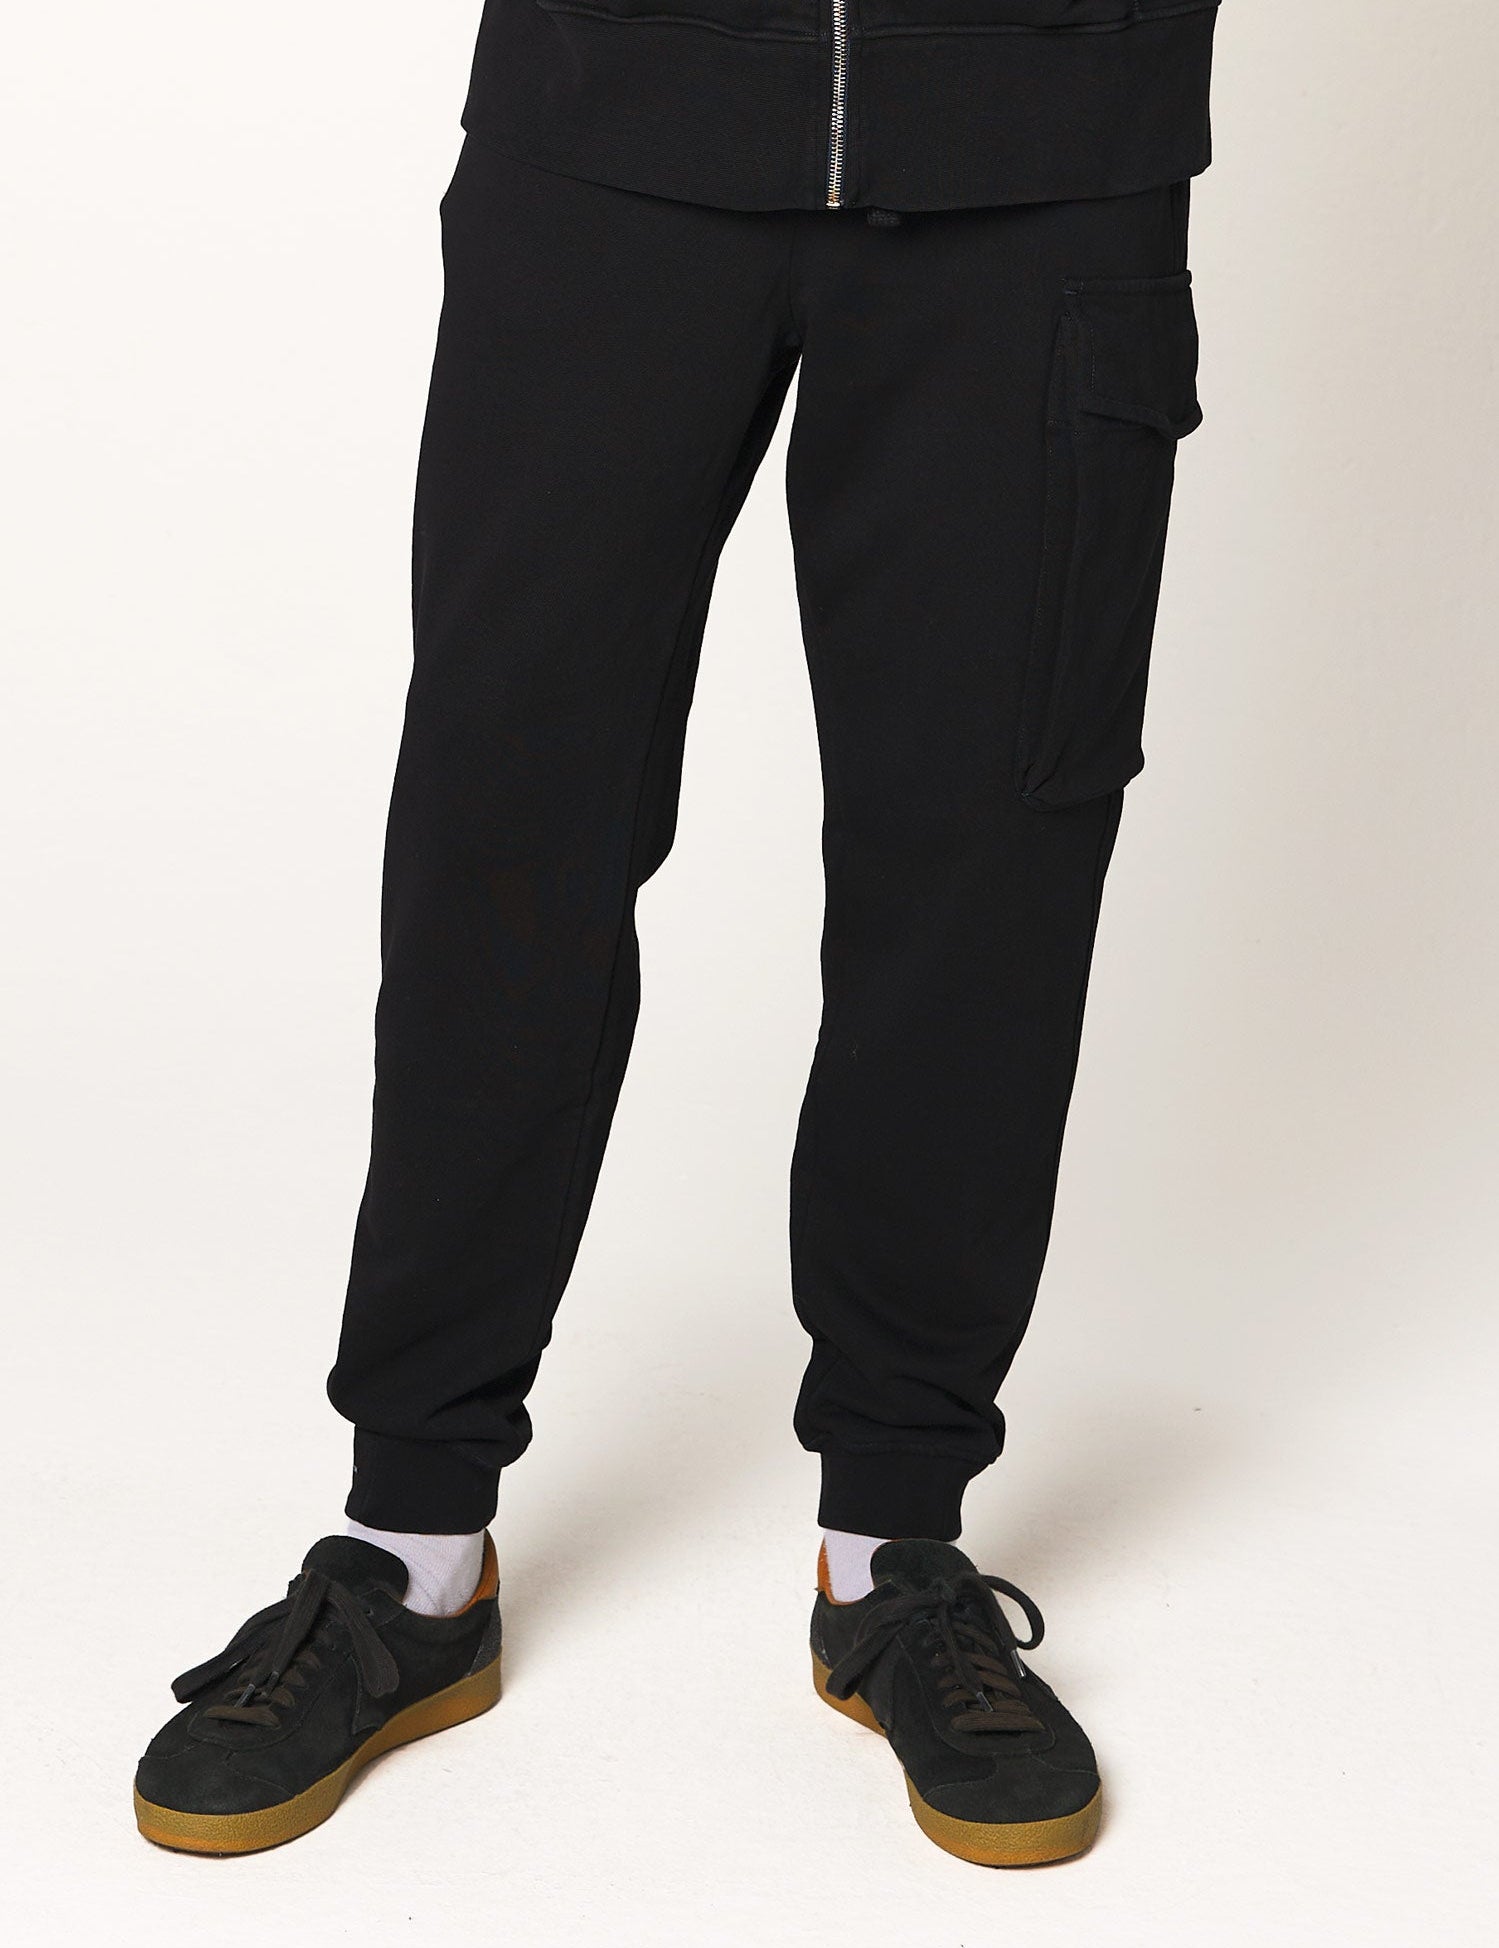 ITEM No. 13 – Track Pant Black Overdyed - Standard Project